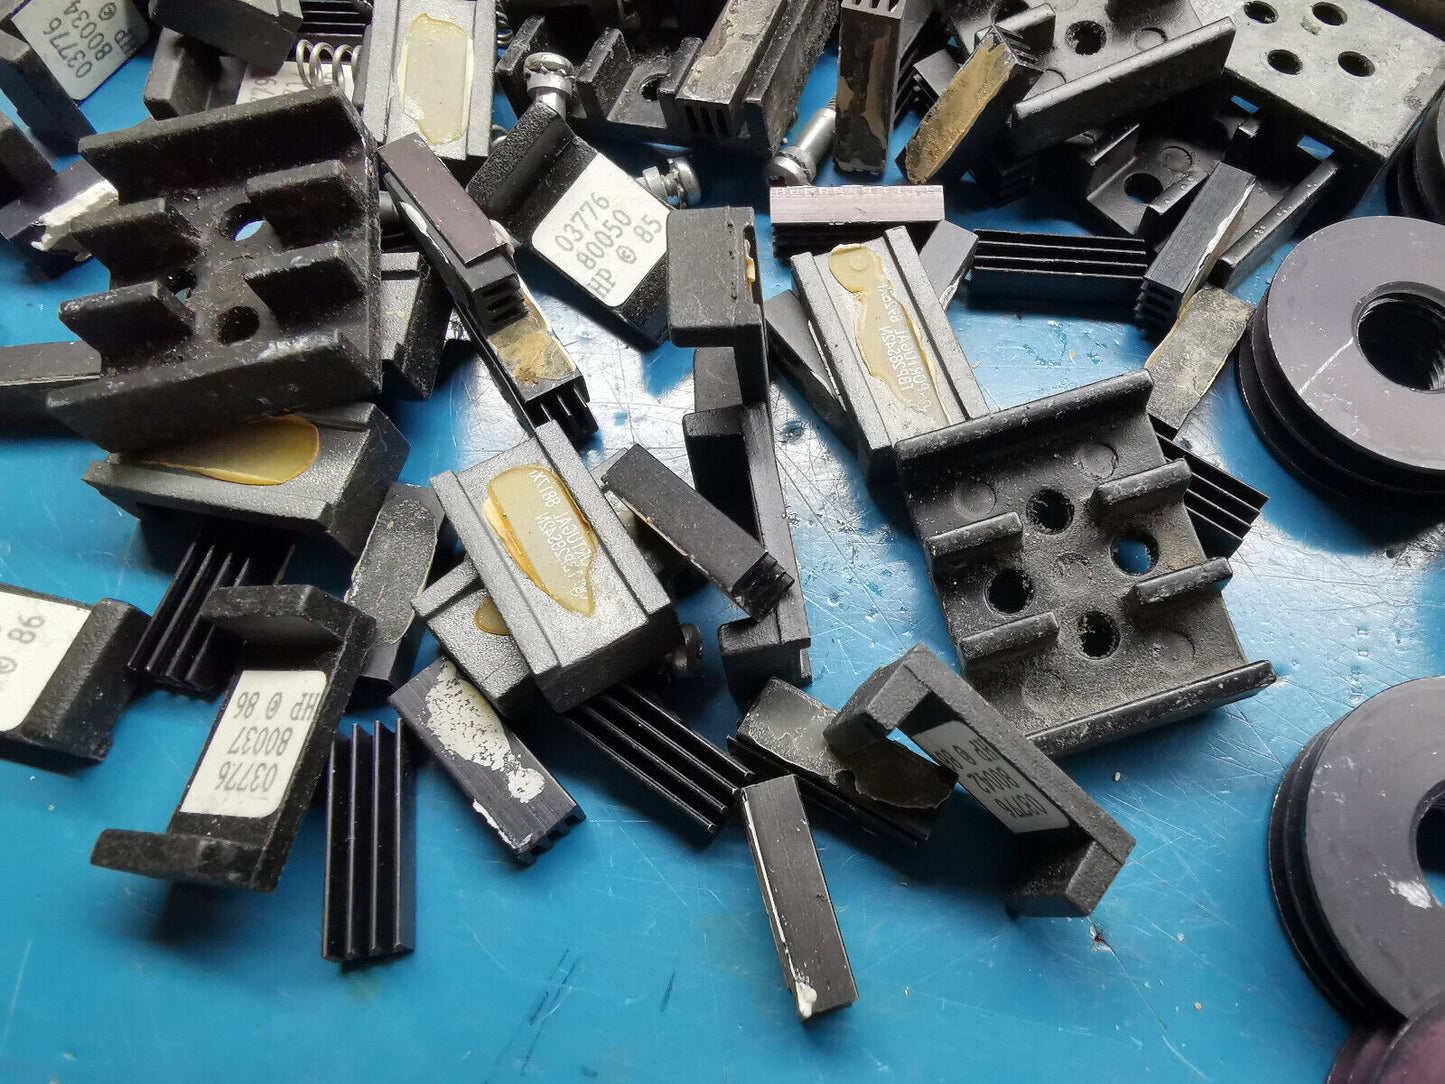 Avvid Thermalloy Heat Sink Joblot For IC And Other Semiconductors